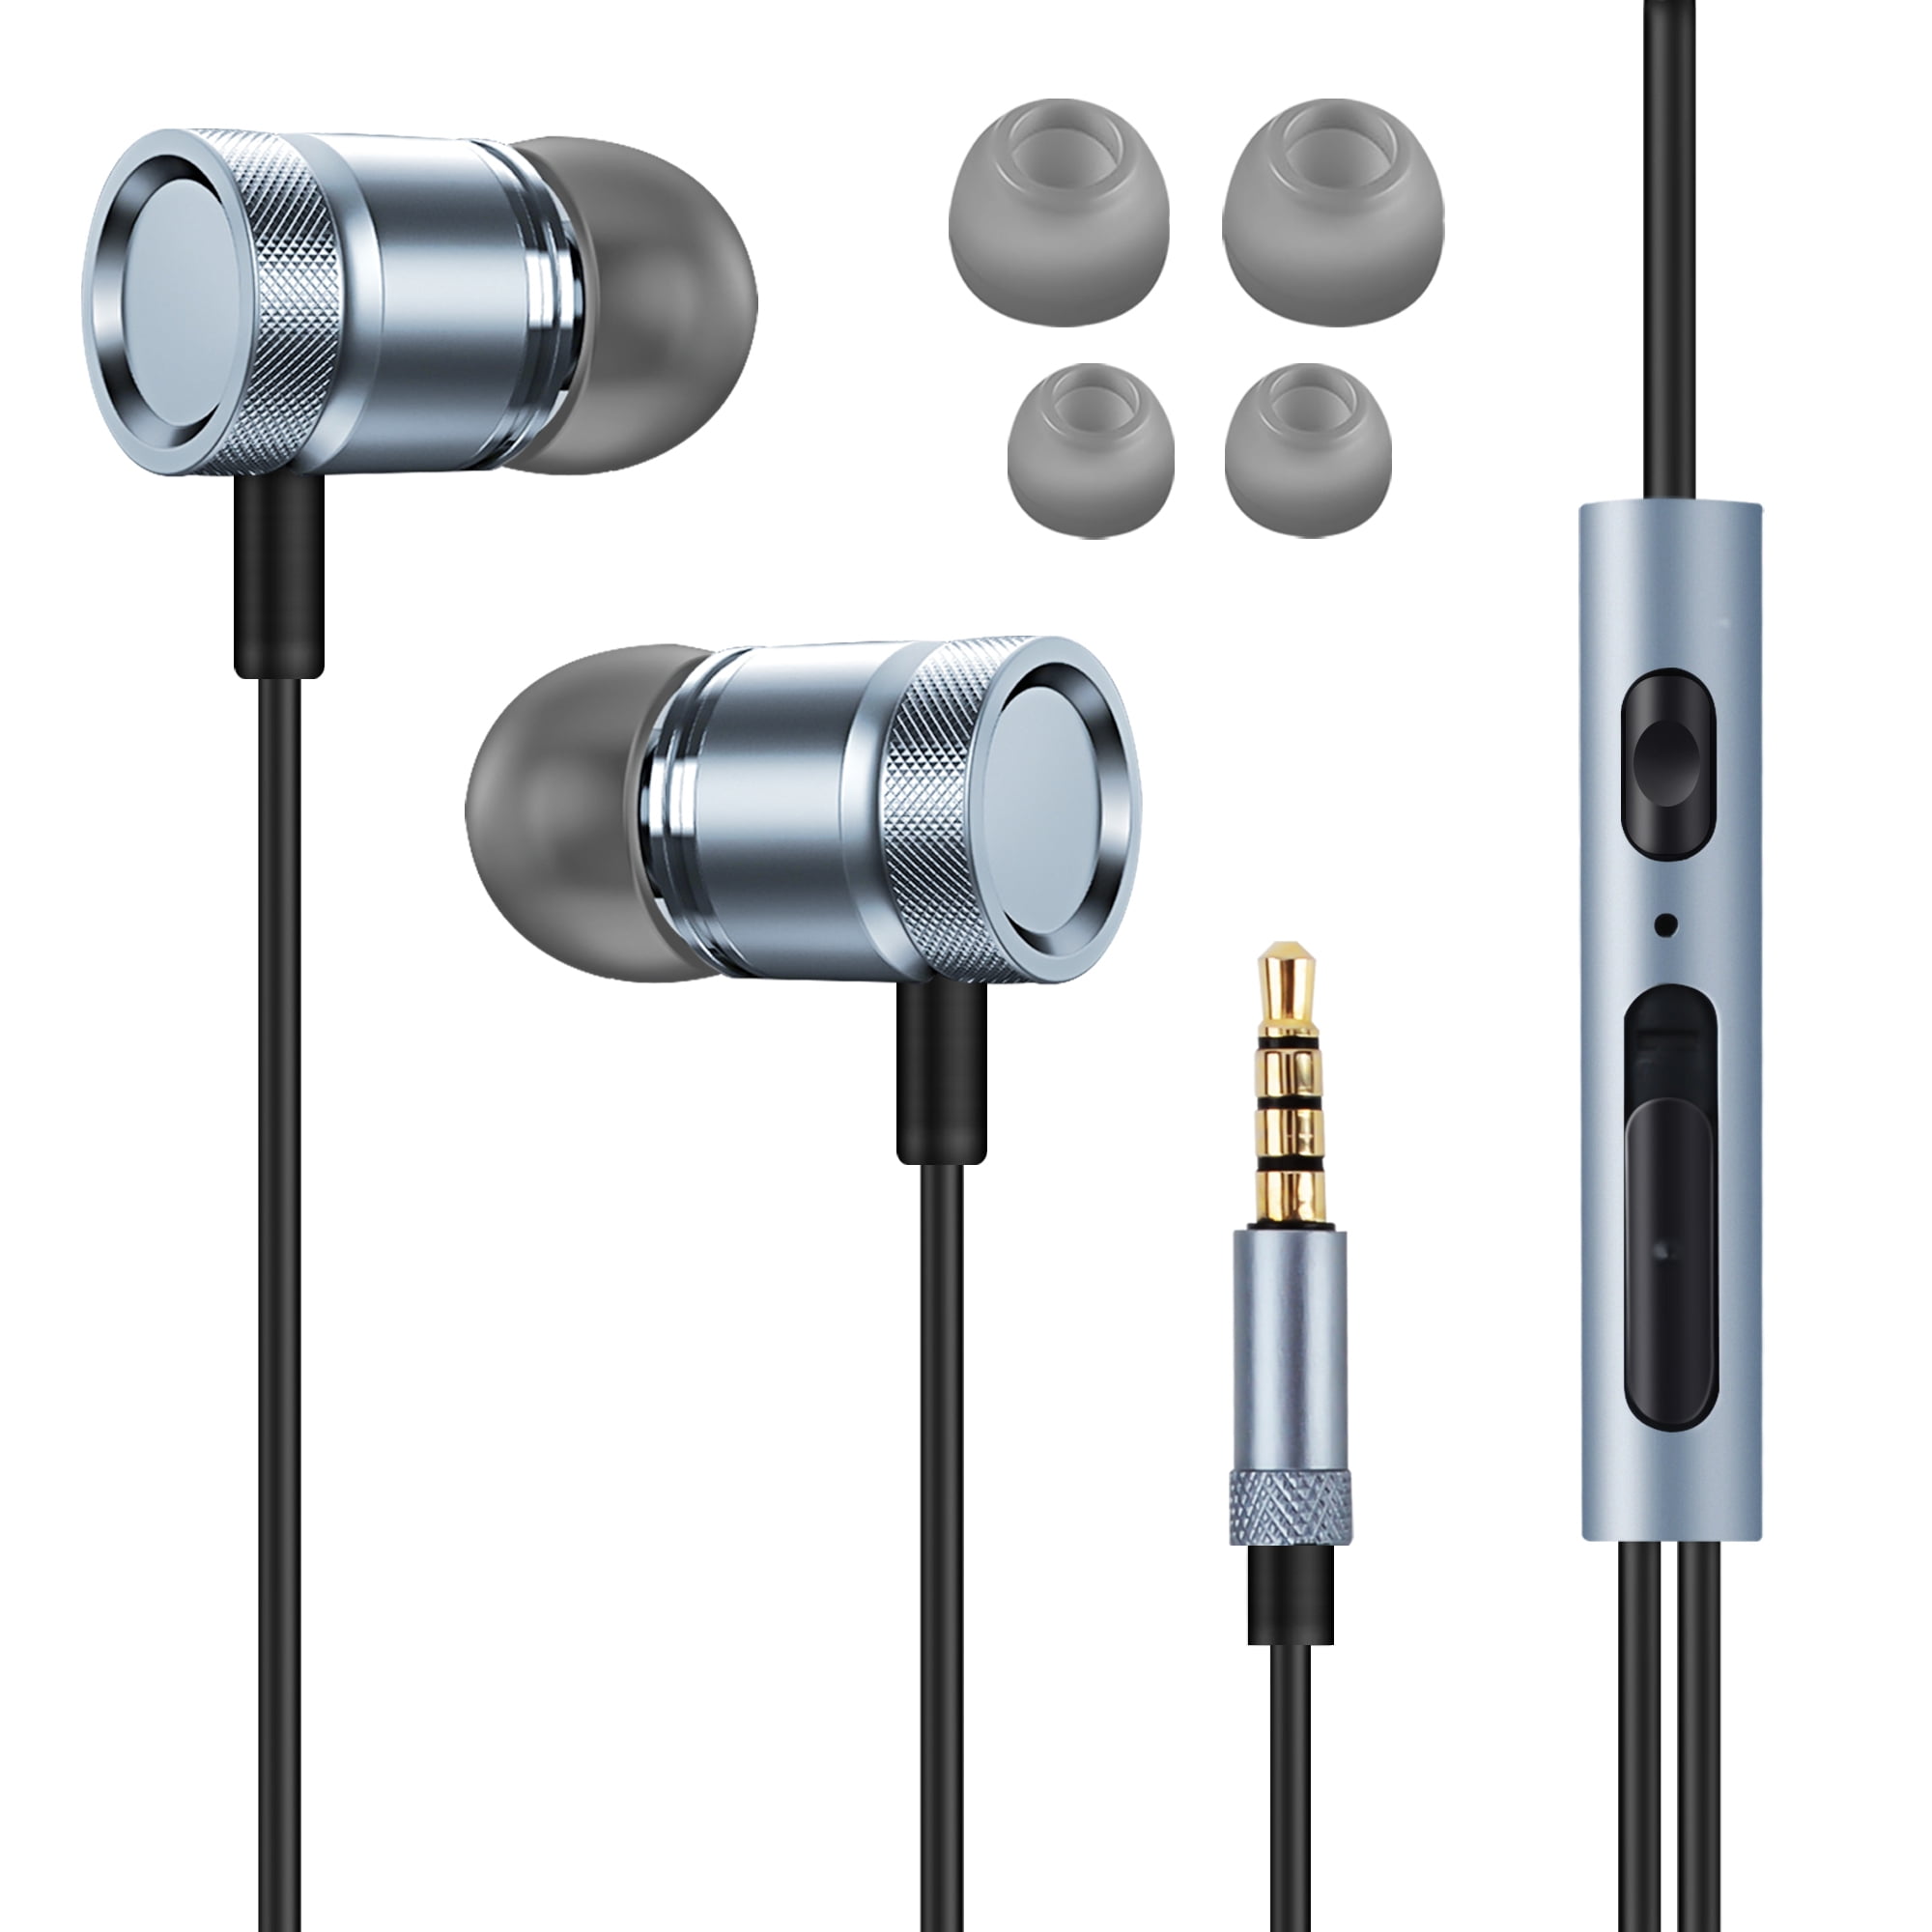 SAMSUNG AKG Wired Earbuds Original 3.5mm in-Ear Earbud Headphones with  Remote & Microphone for Music, Phone Calls, Work - Noise Isolating Deep  Bass